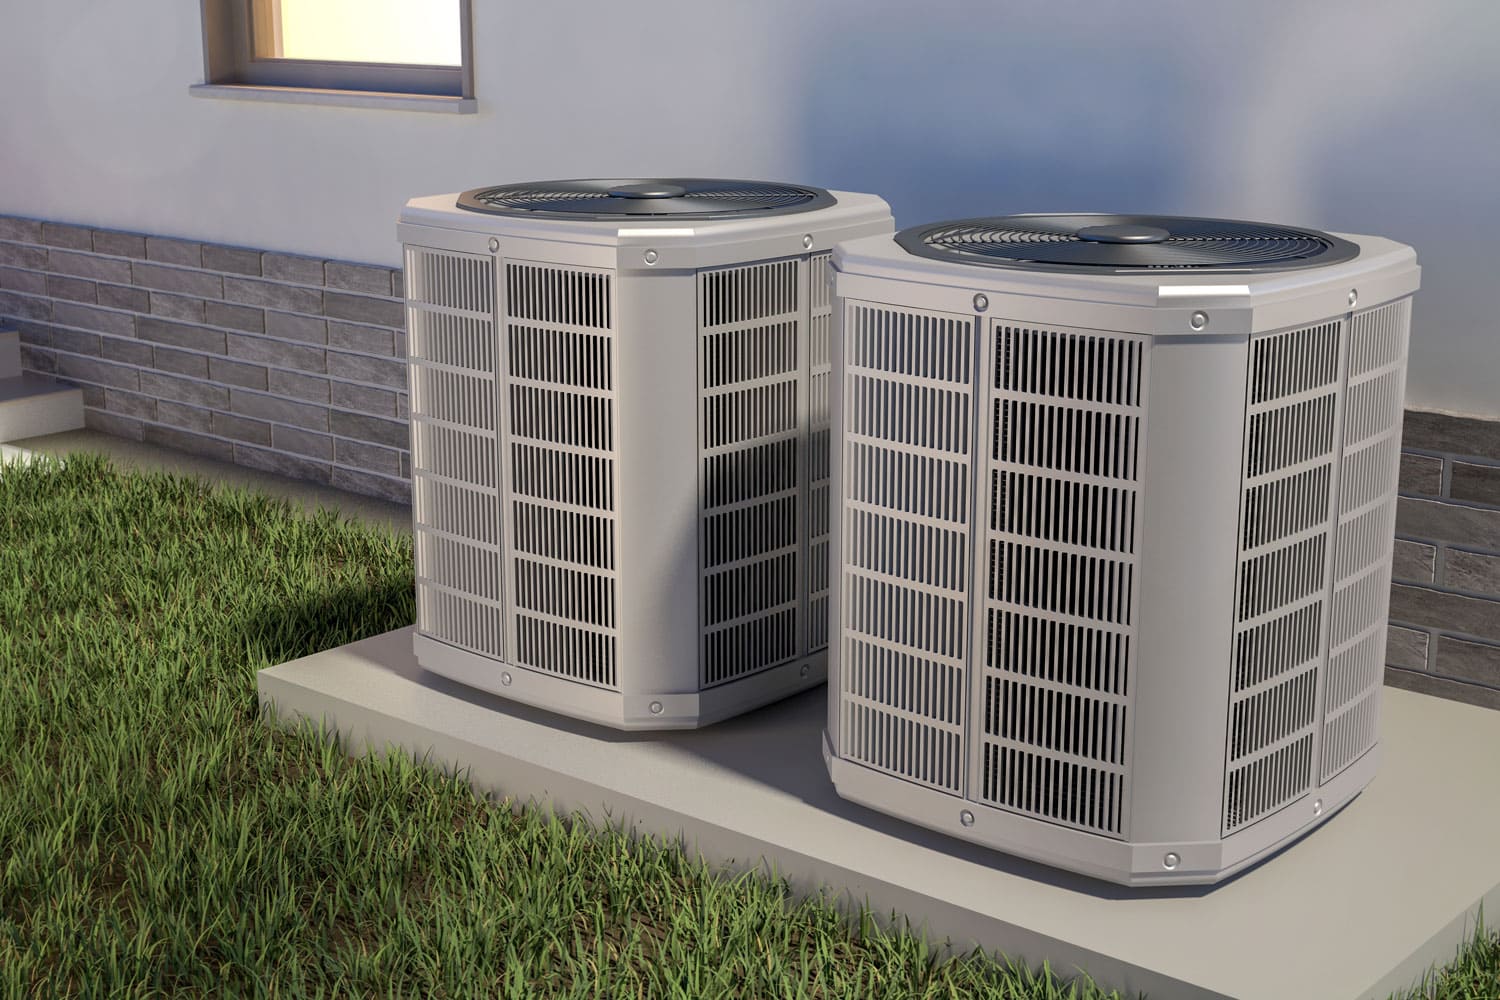 Two heat pumps mounted on concrete slabs